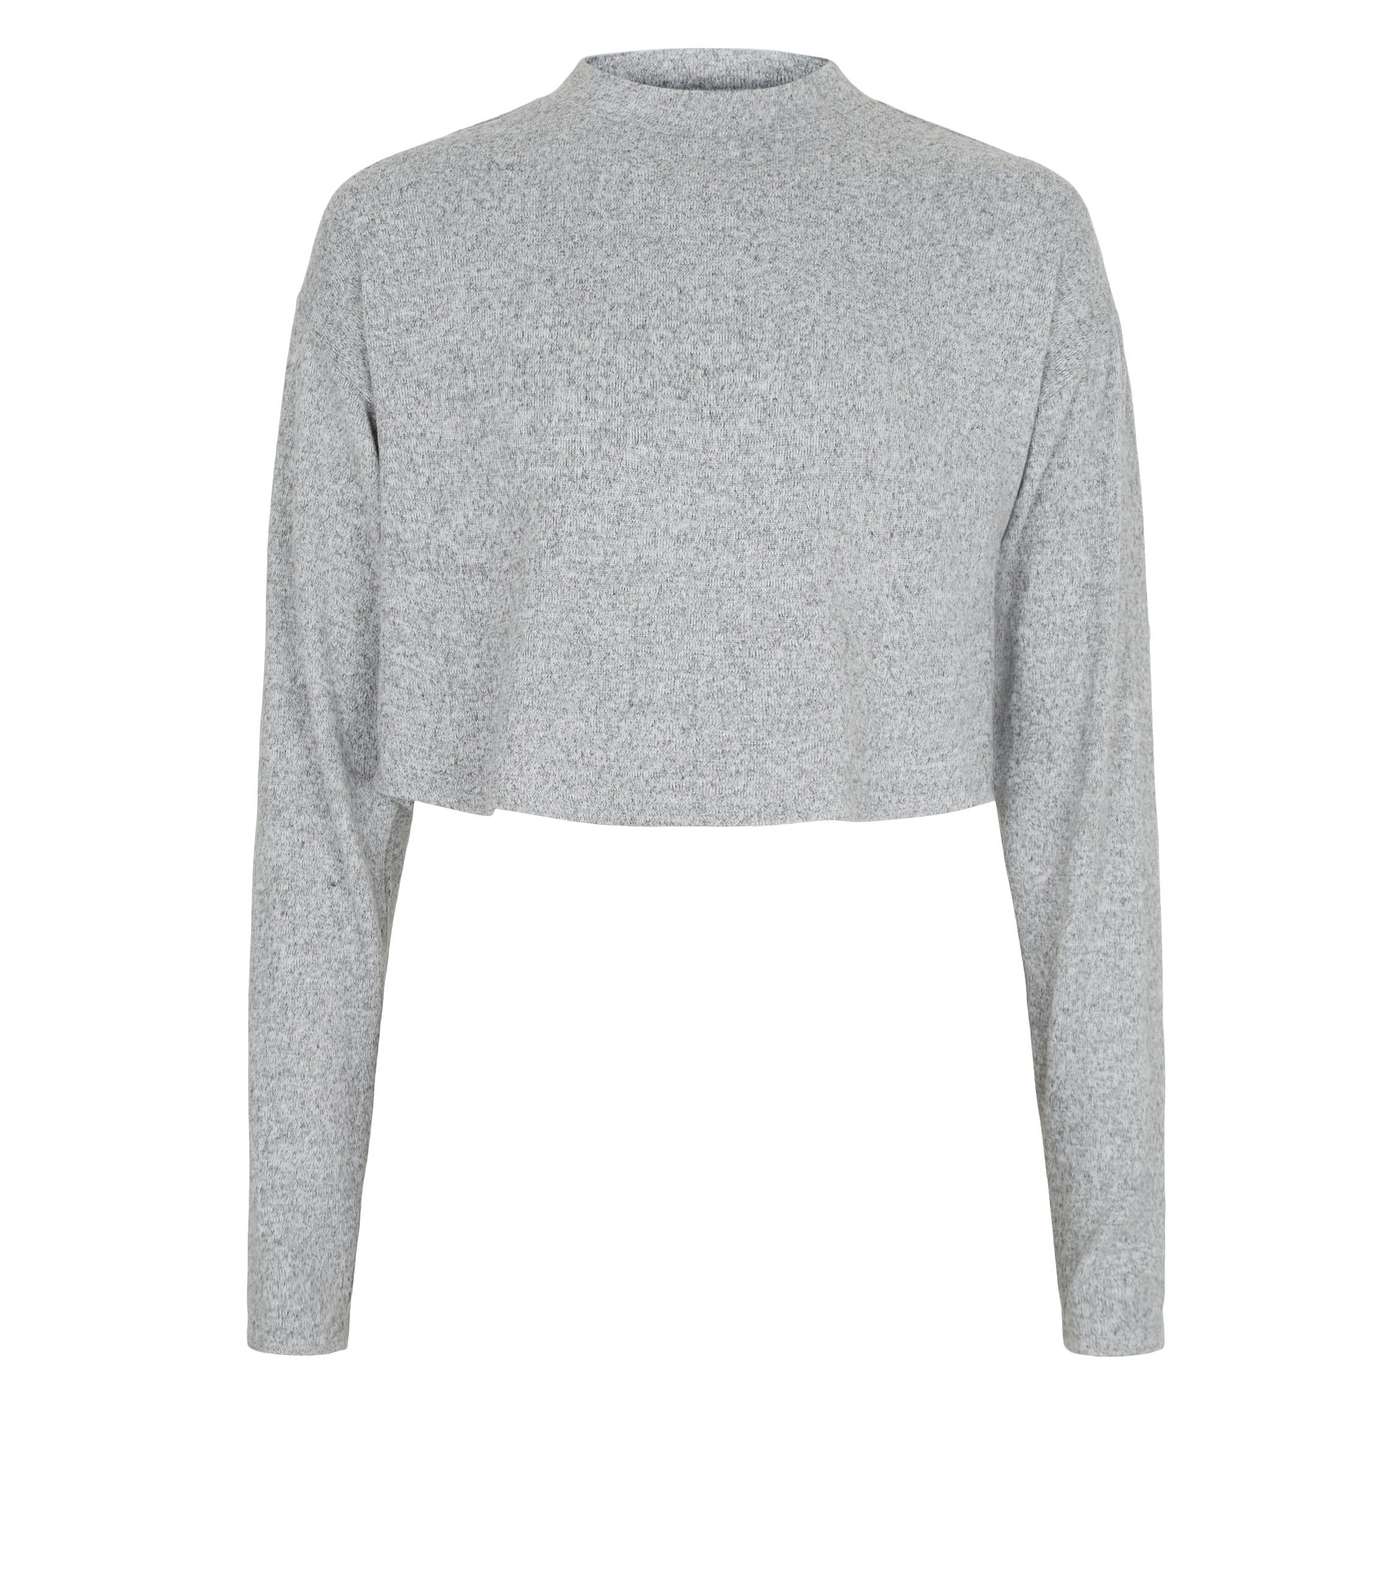 Girls Grey High Neck Recycled Jumper Image 4